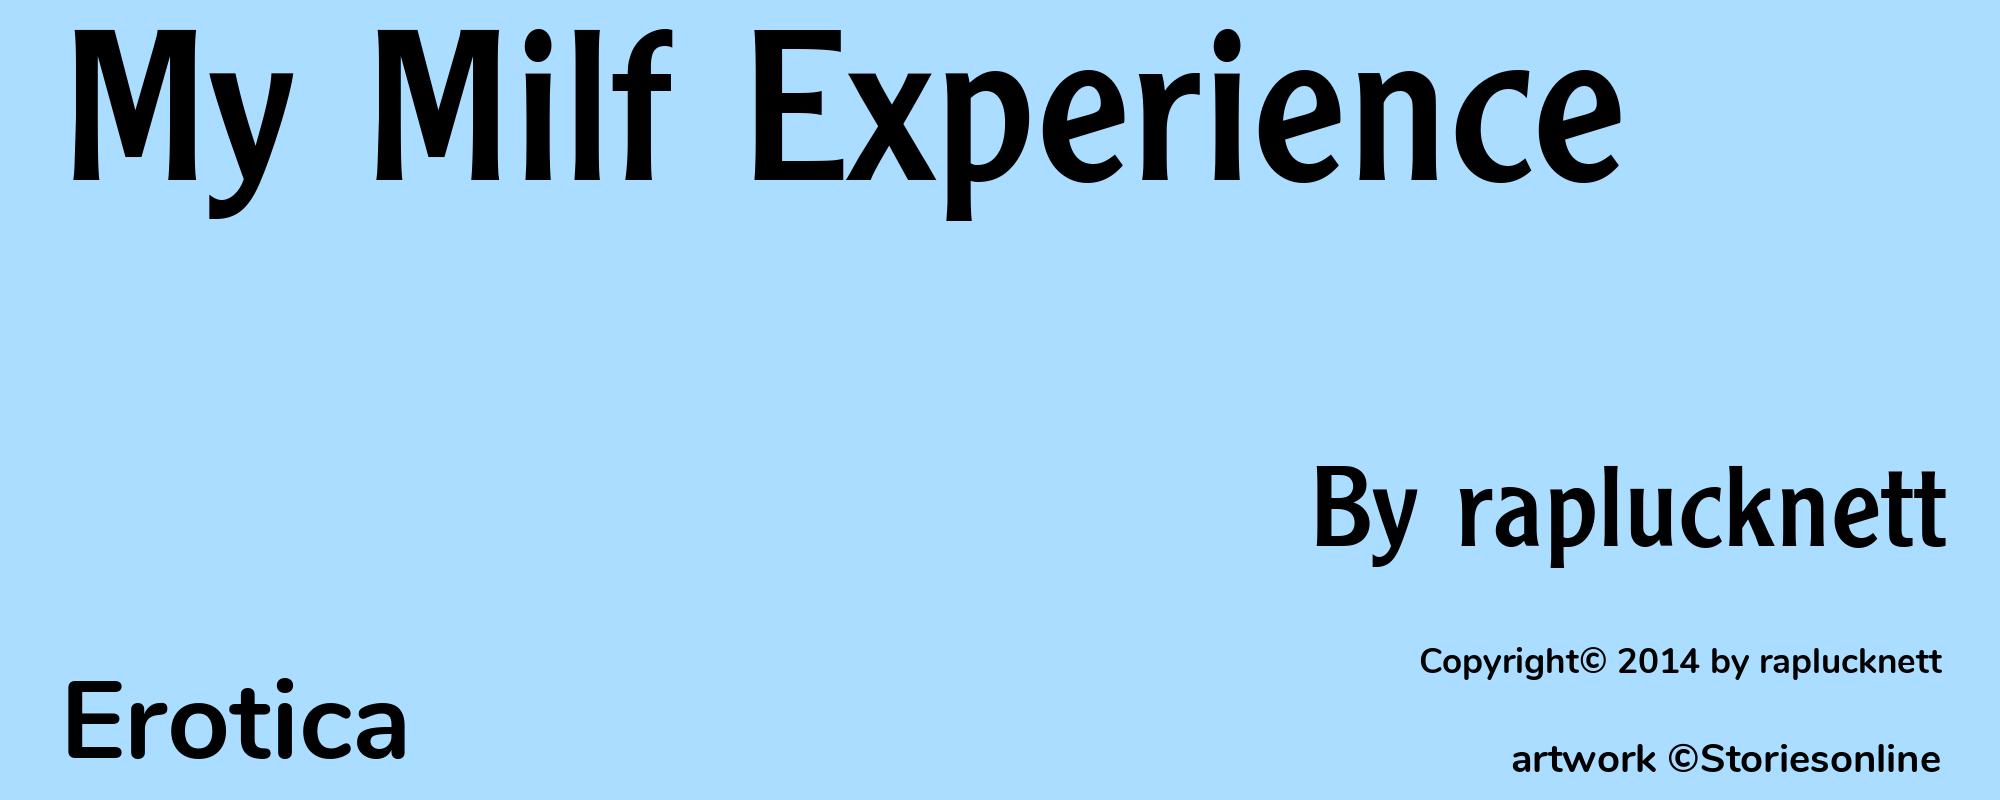 My Milf Experience - Cover